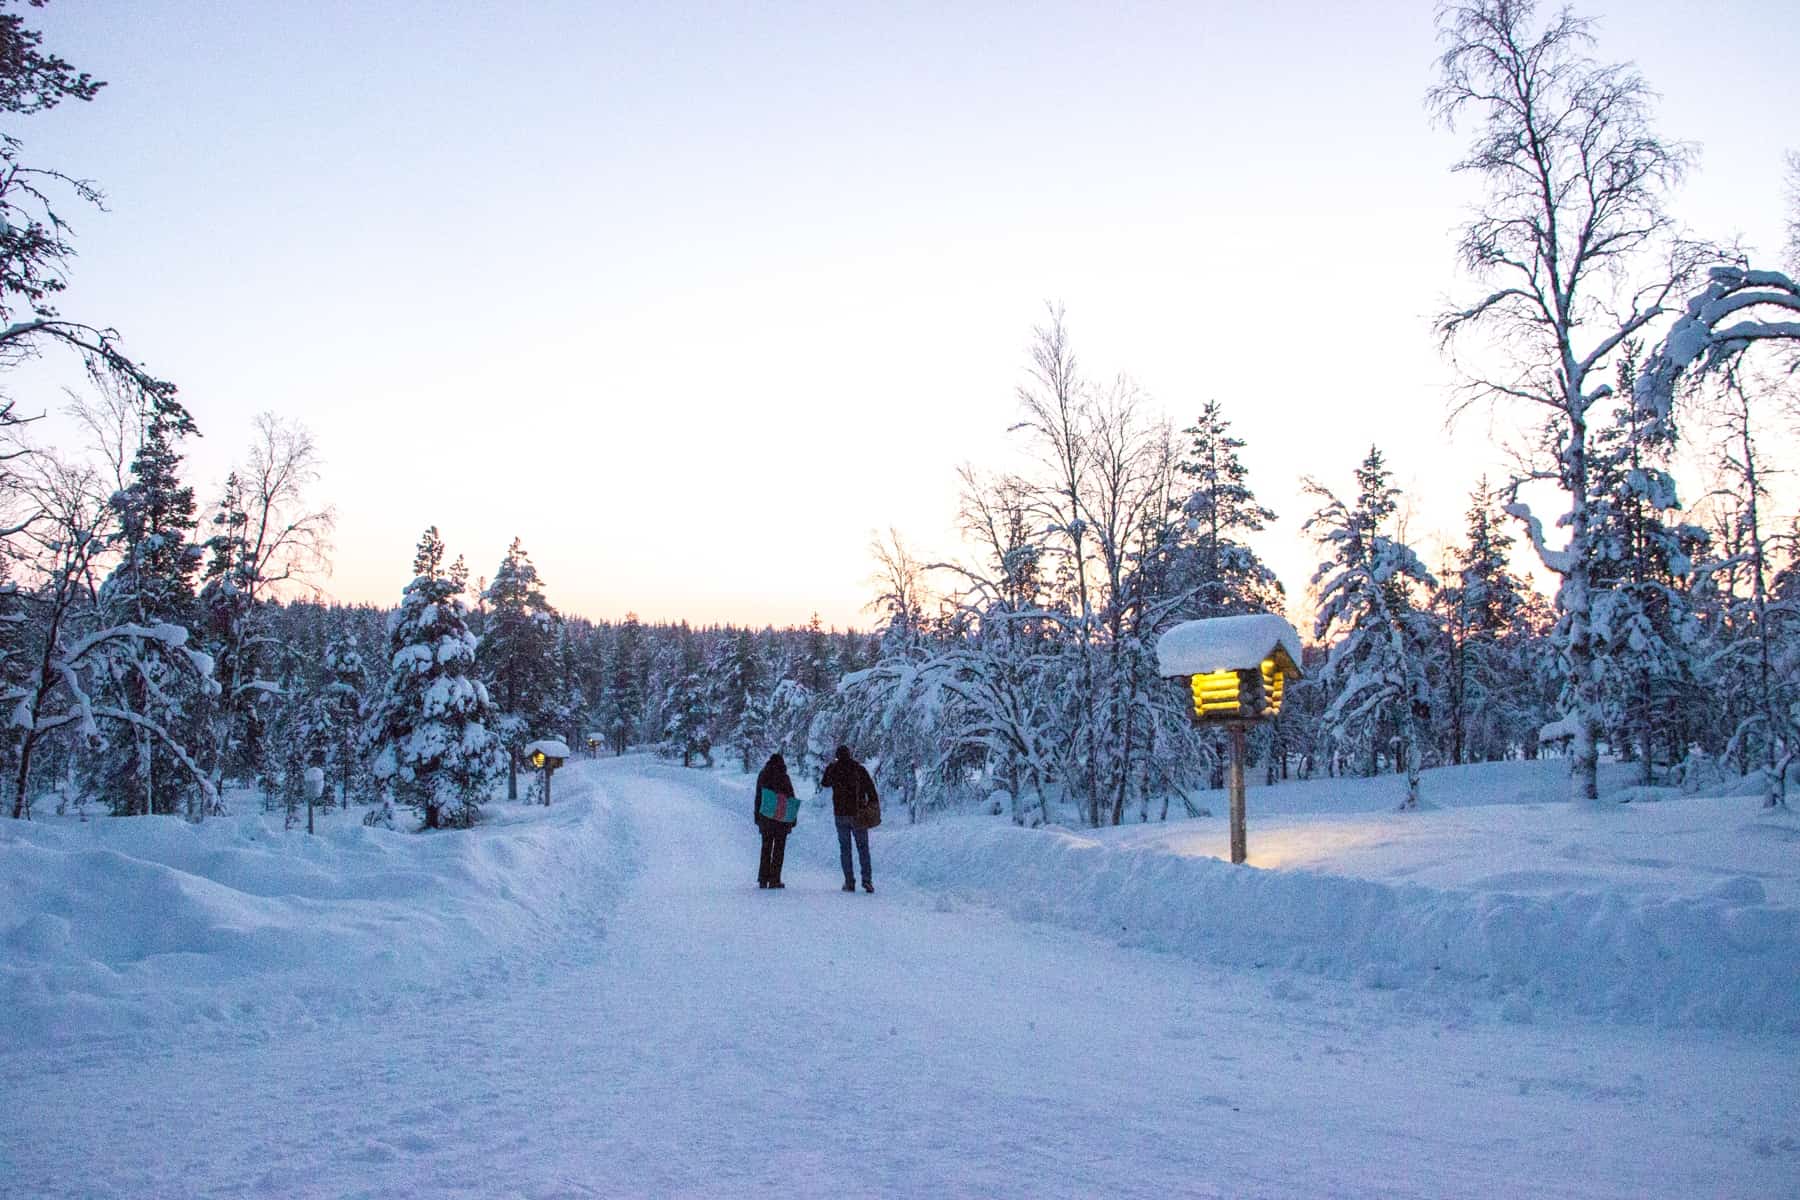 Two people walk down a wide pathway that cuts through a forest blanketed in snow, marked by a large square lamp with a yellow light. 